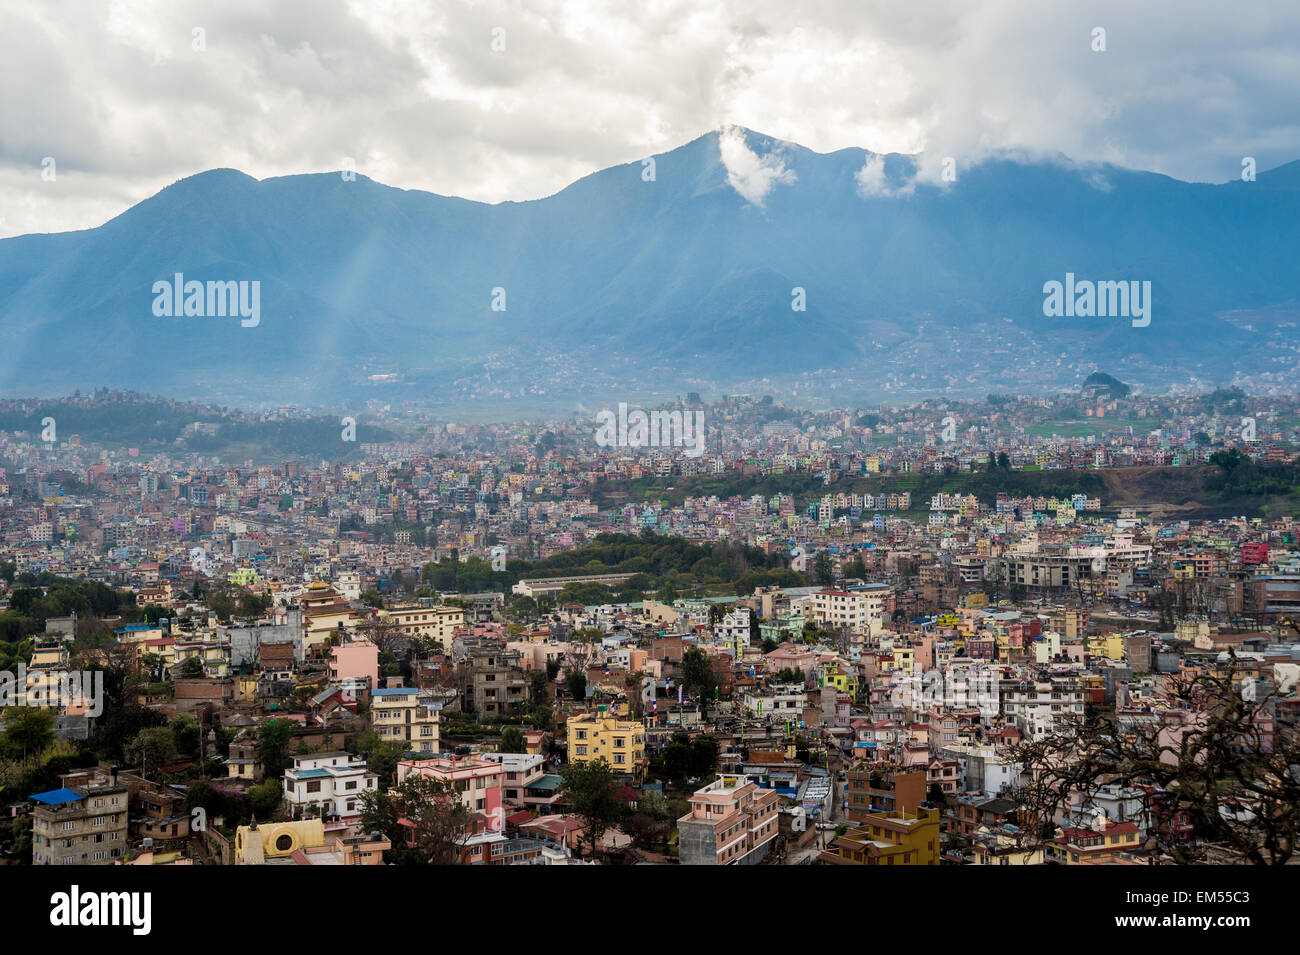 View of Kathmandu Valley with mountains in the background Stock Photo